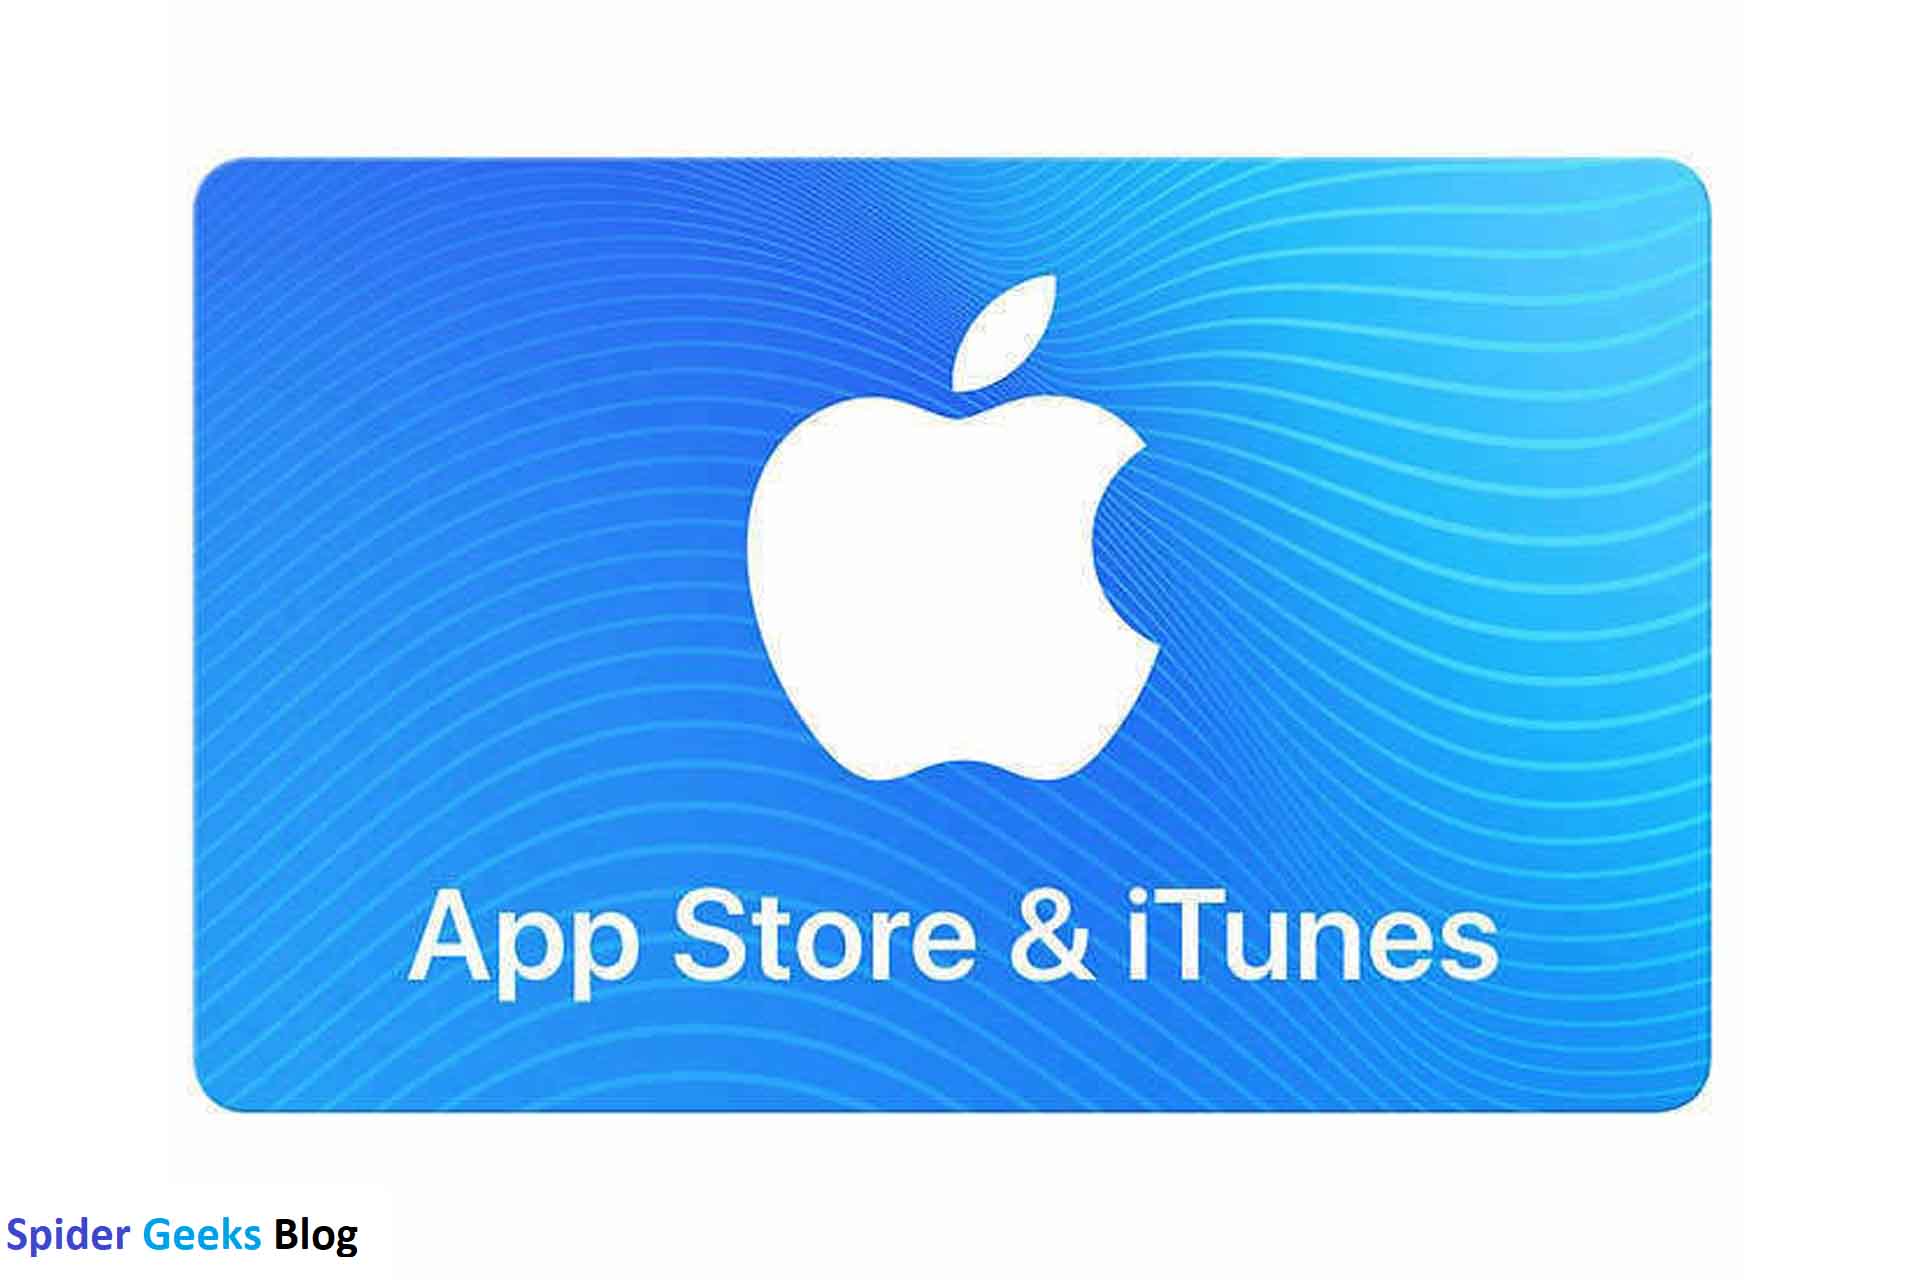 🏆Apple iTunes Gift card 4000 RUBLES🏅PRICE🔥✅